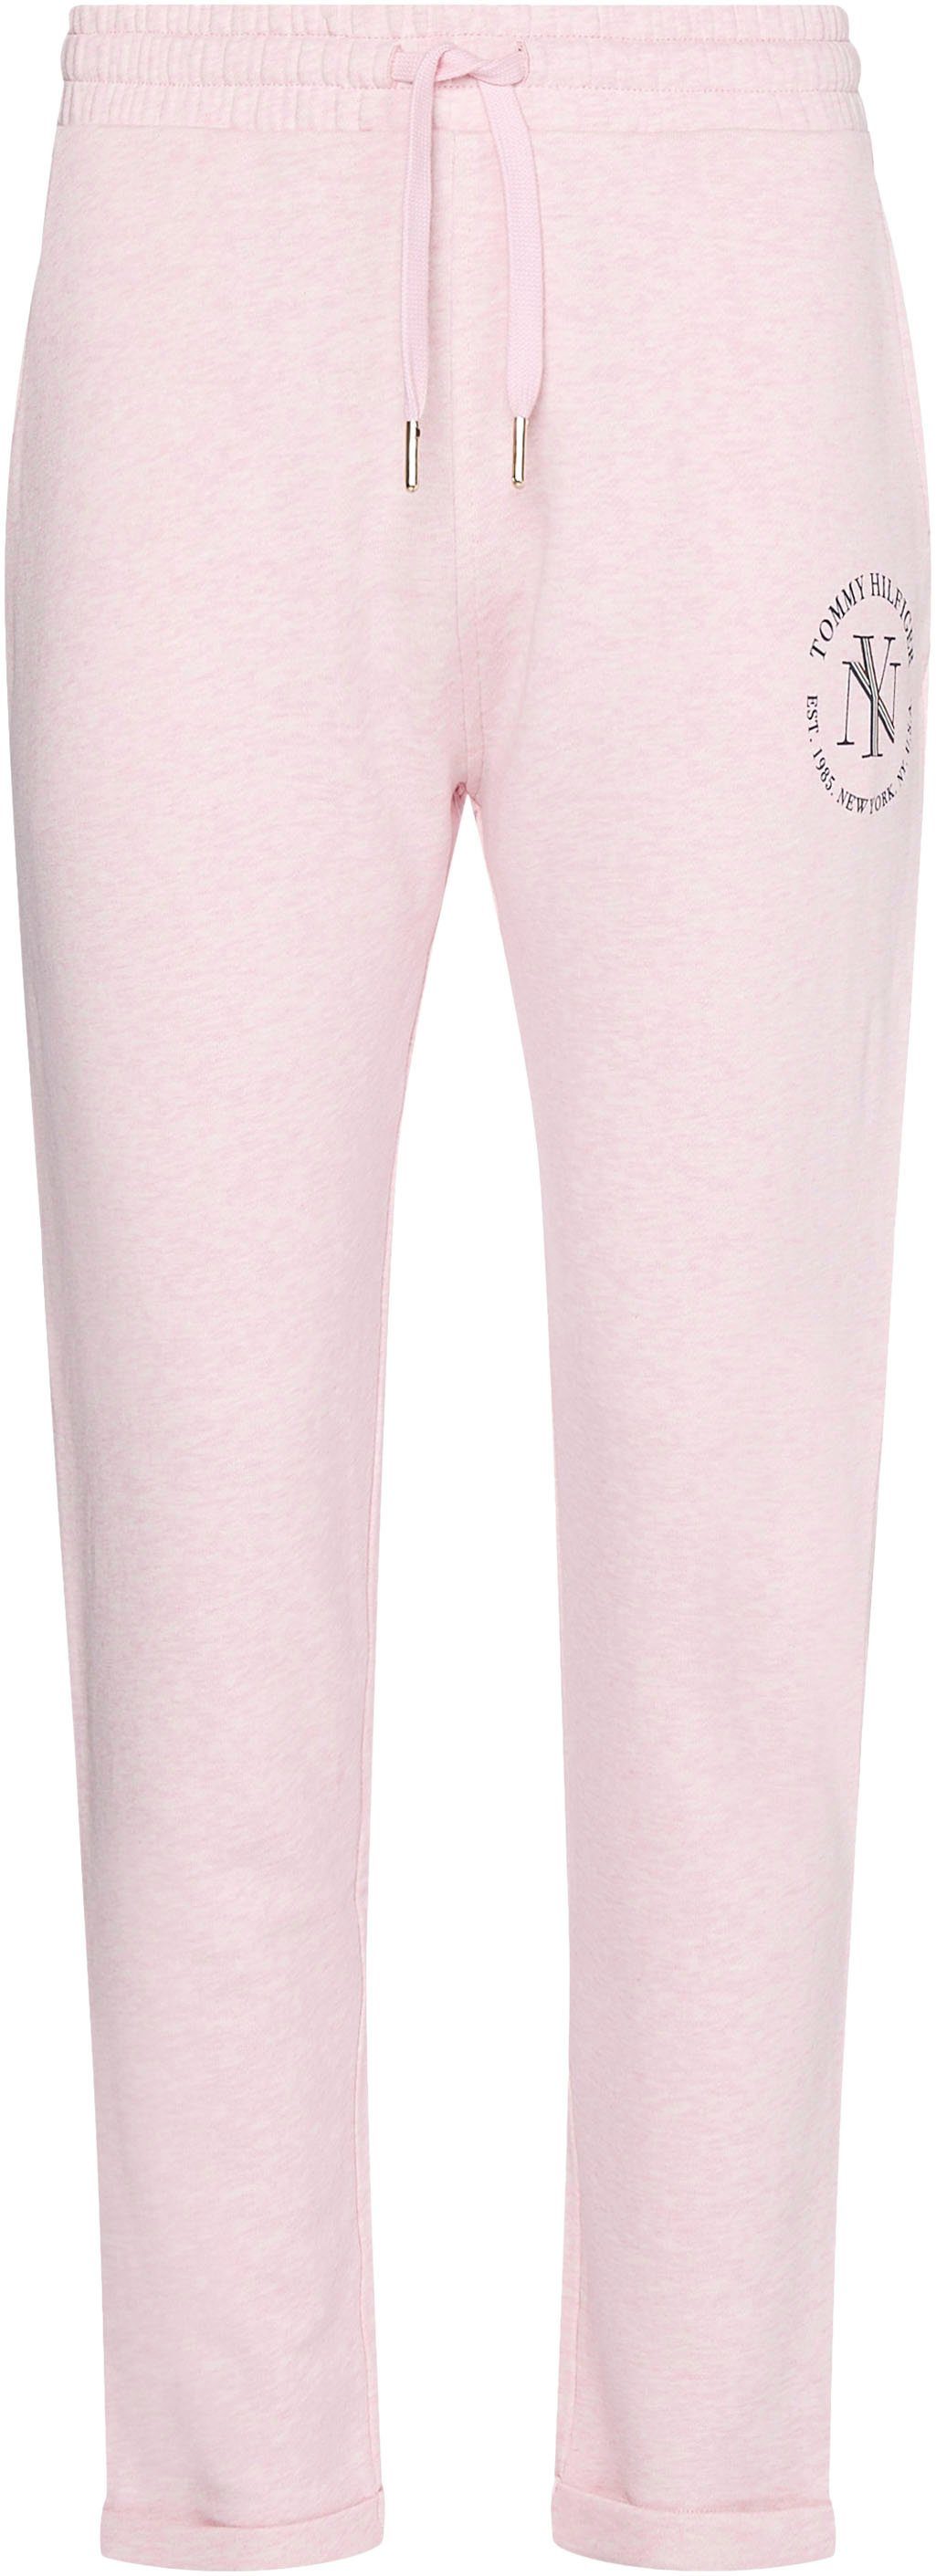 Hilfiger SWEATPANTS Hilfiger Markenlabel Classic-Pink-Heather NYC mit Sweatpants Tommy Tommy ROUNDALL TAPERED